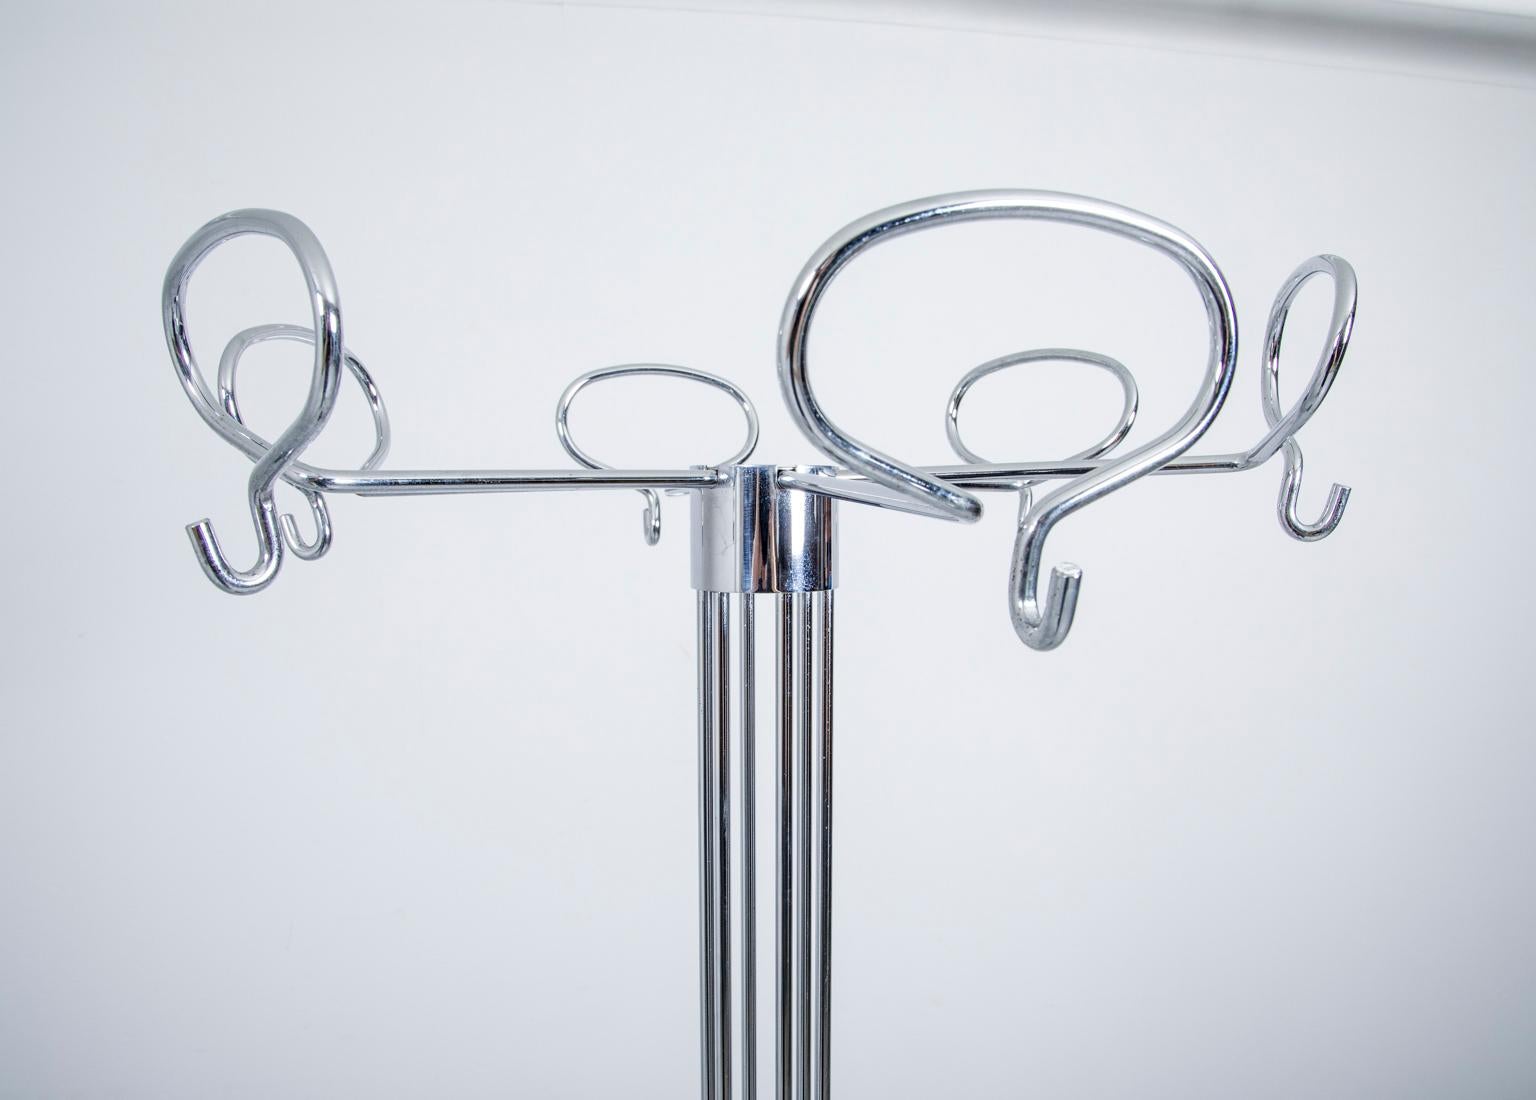 Coat rack / hangar produced by Valenti Cusago in Milan, Italy. Valenti is a renowned design house known for collaborating with innovative and recognized designers. The coat racks / hangars date to the 1980s and are made from chromed steel and a